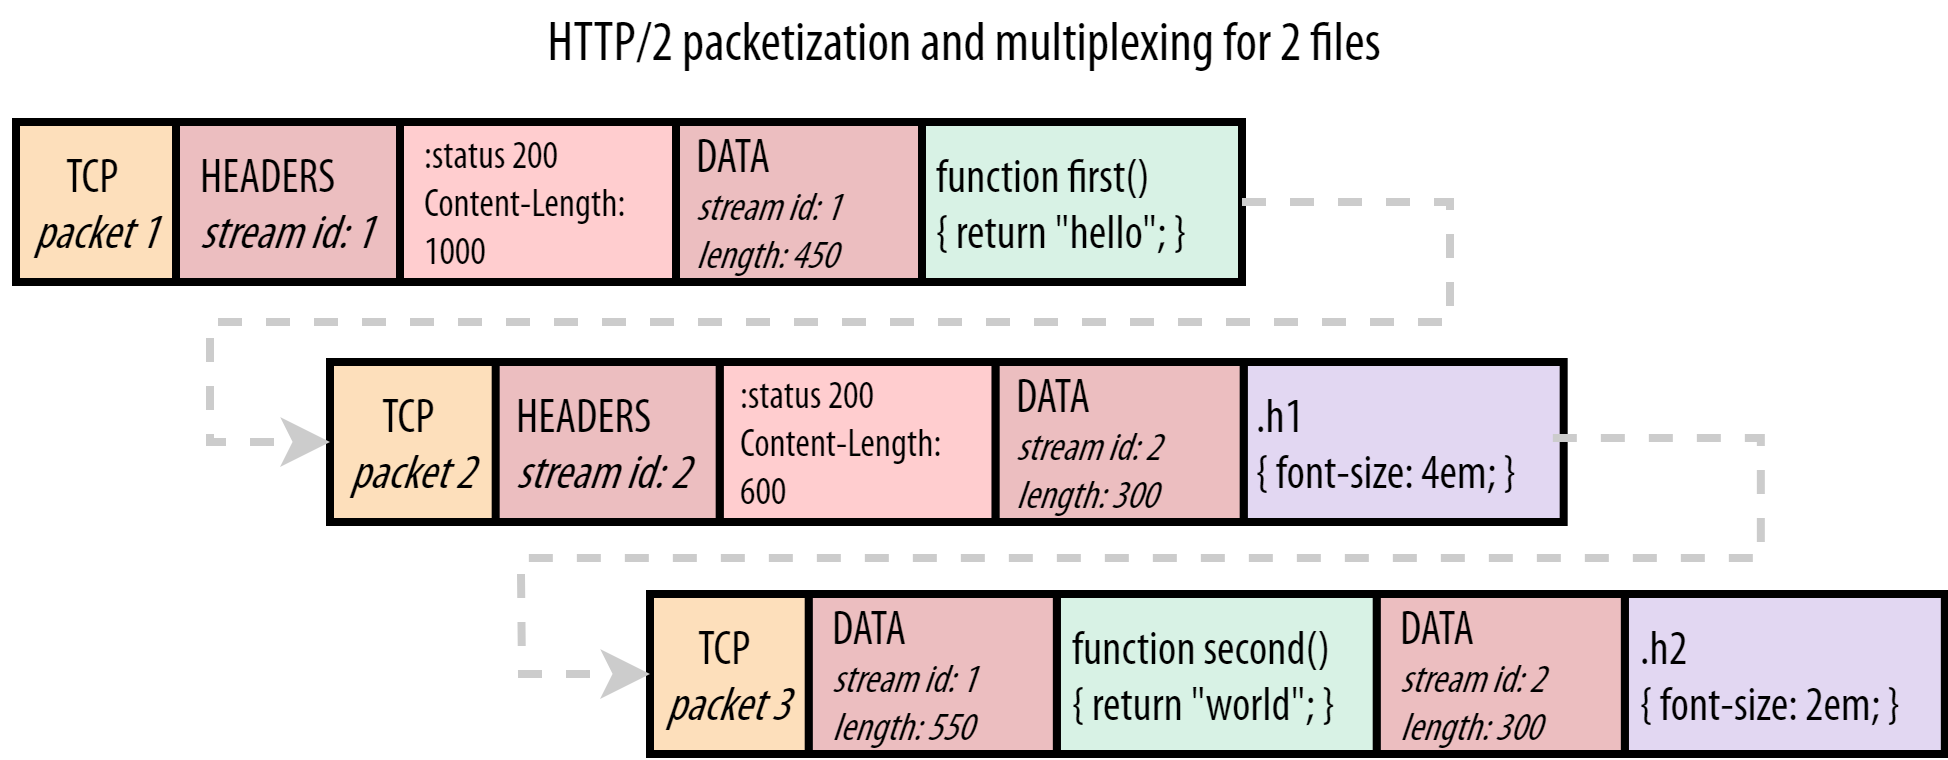 HTTP2 frames in TCP packets